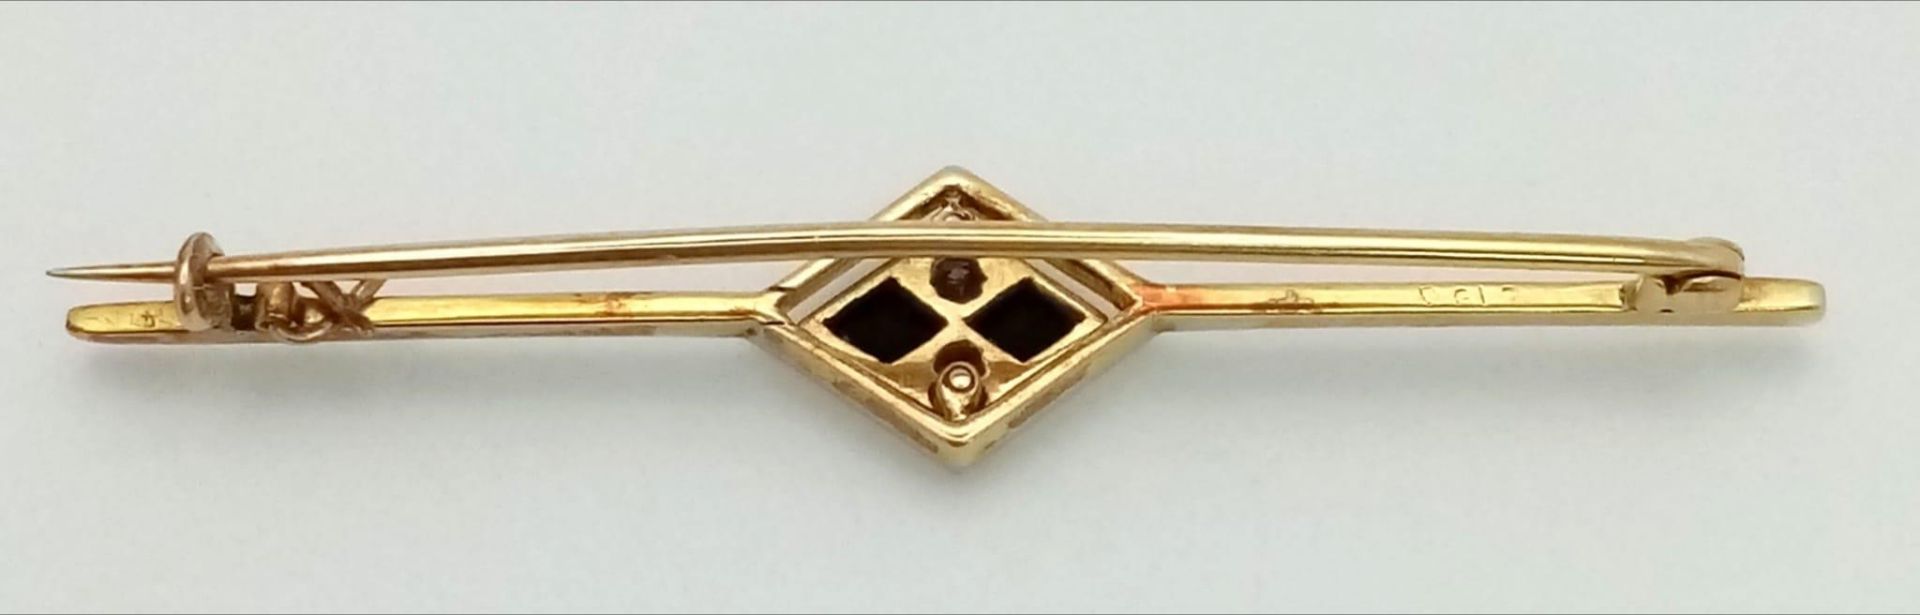 An Art Deco Diamond and Onyx Brooch in 18K Gold and Platinum. 5.5cm. 3.75g total weight. - Image 3 of 4